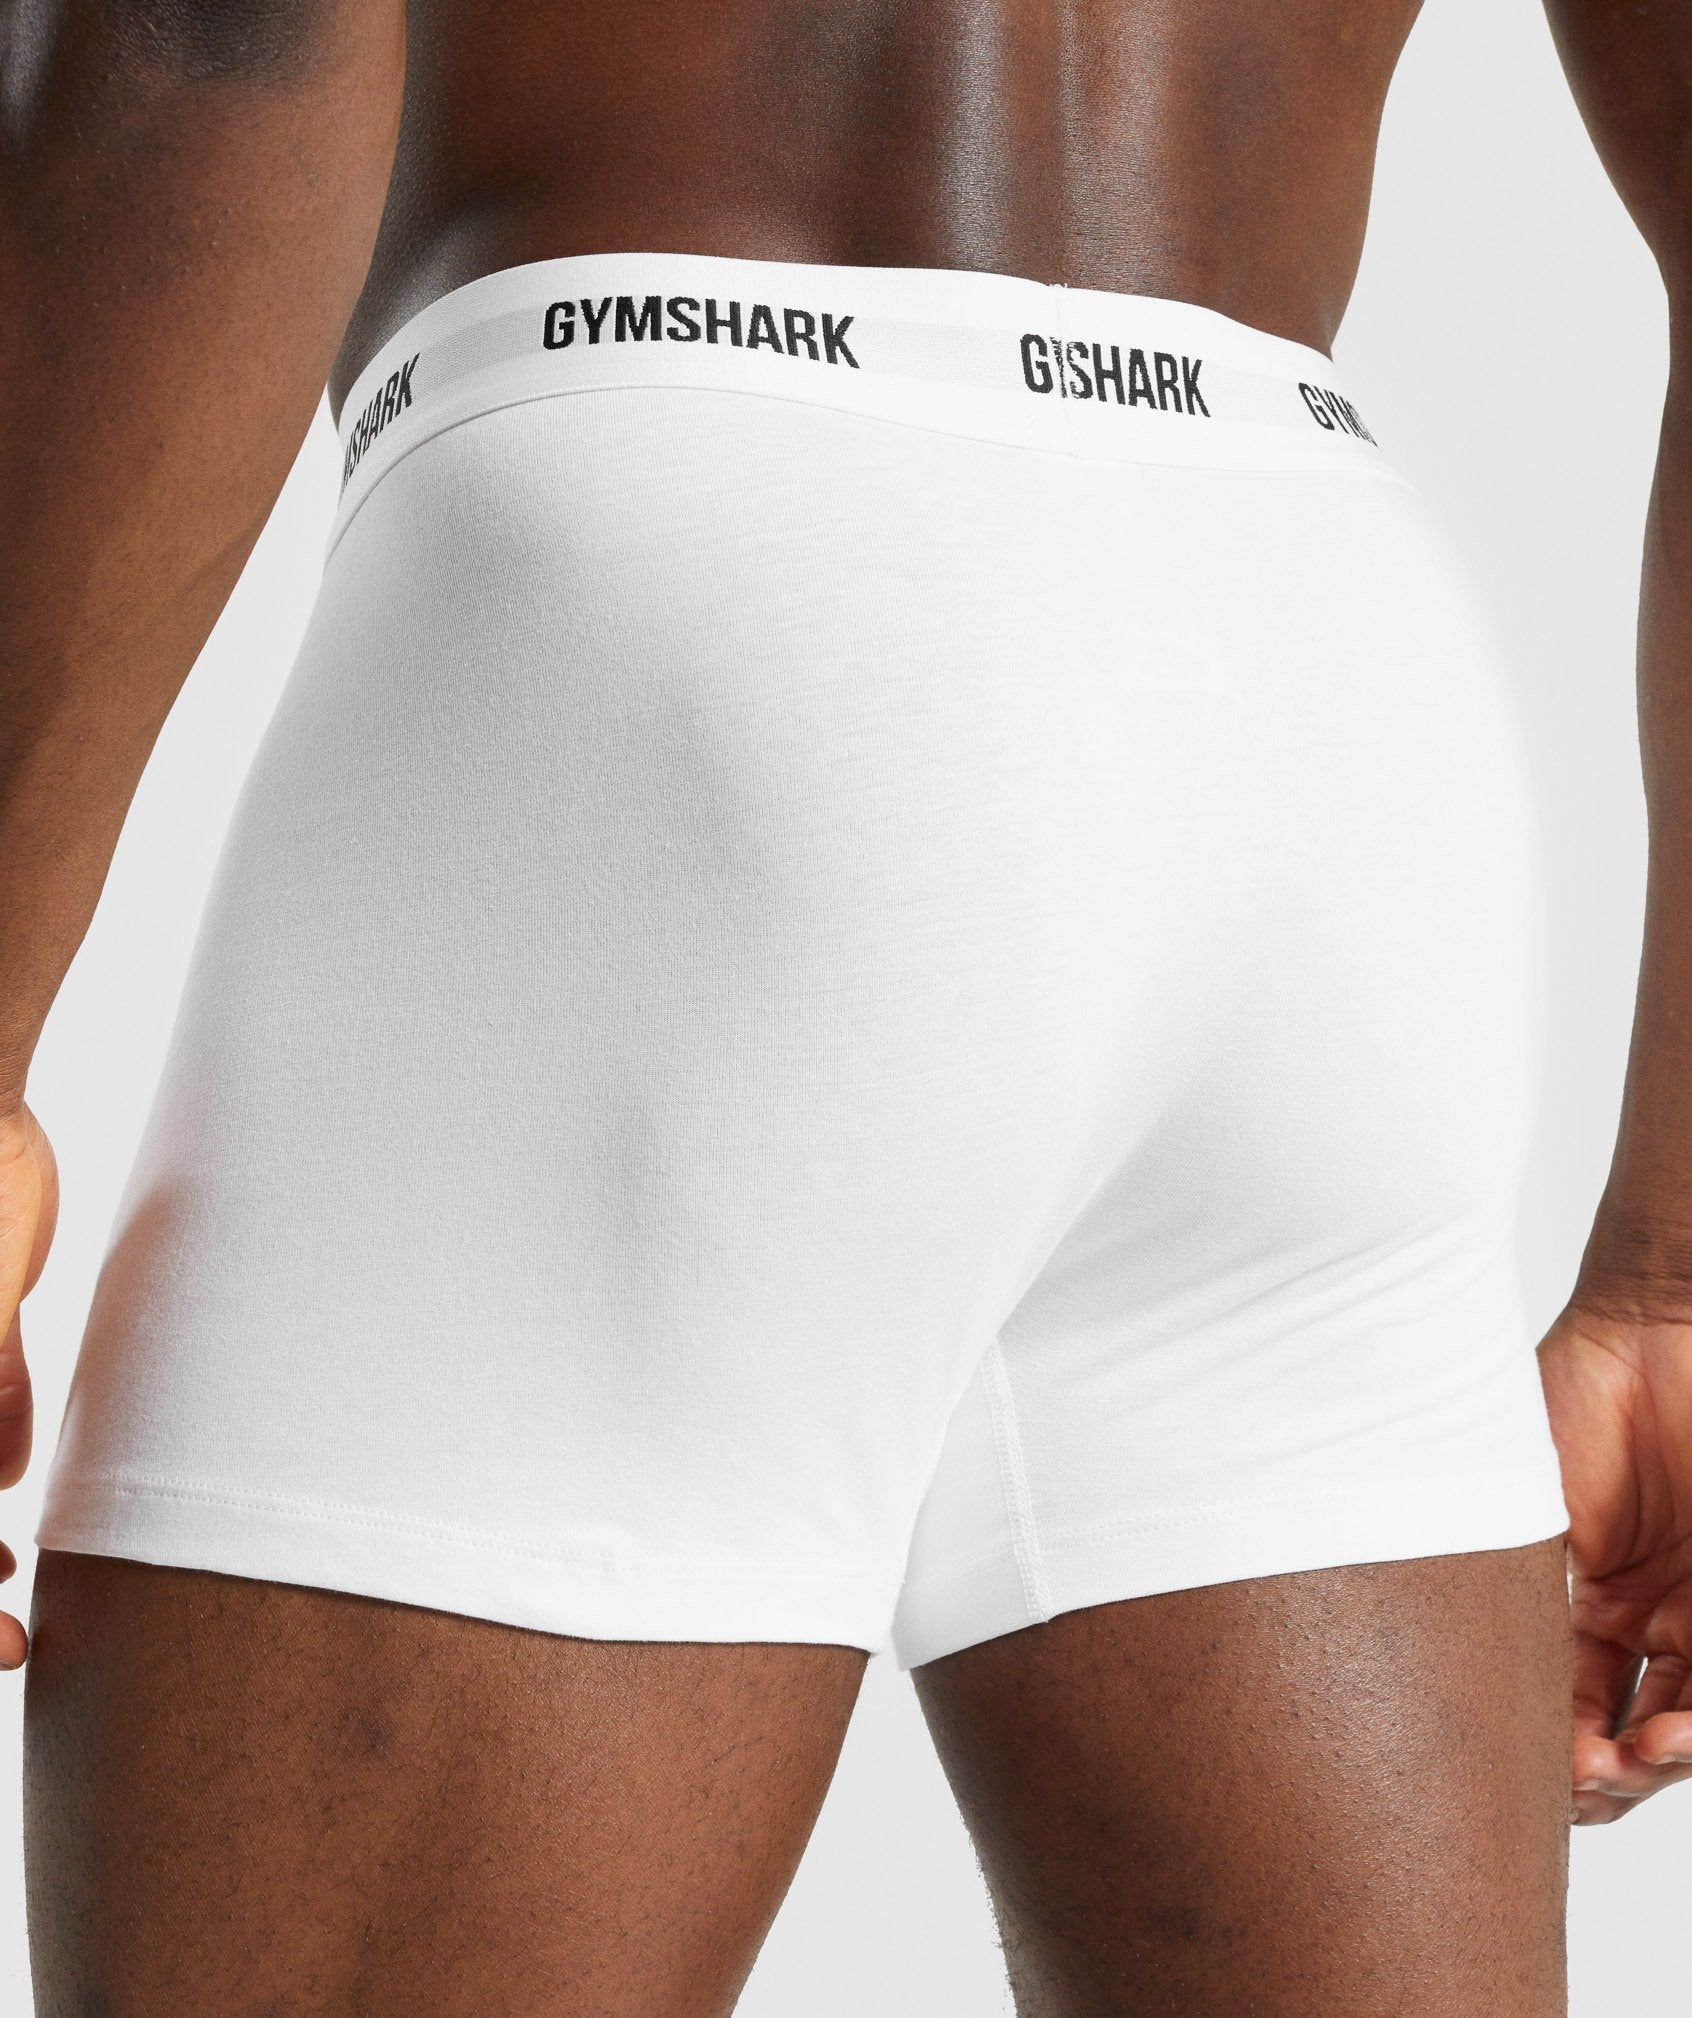 Gymshark on X: Trunks or Hipsters? It's National Underwear Day so why not  grab some every day boxers? Plus they're 30% off too 💪    / X